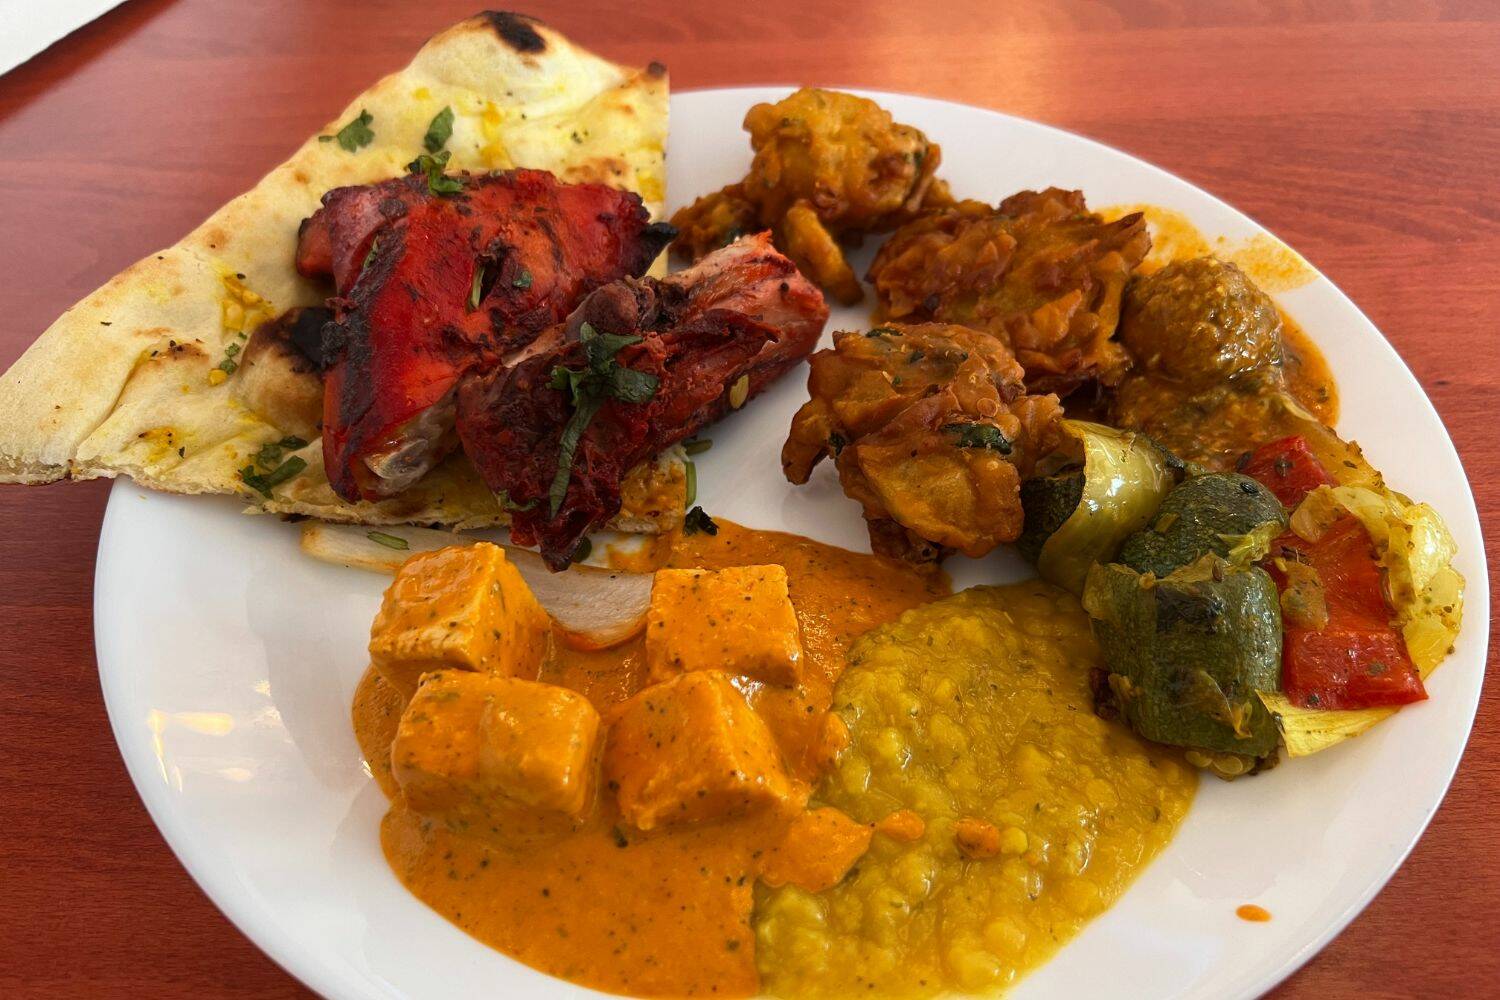 Photo by Cameron Sheppard/Sound Publishing
A lunch buffet plate at East India Grill.